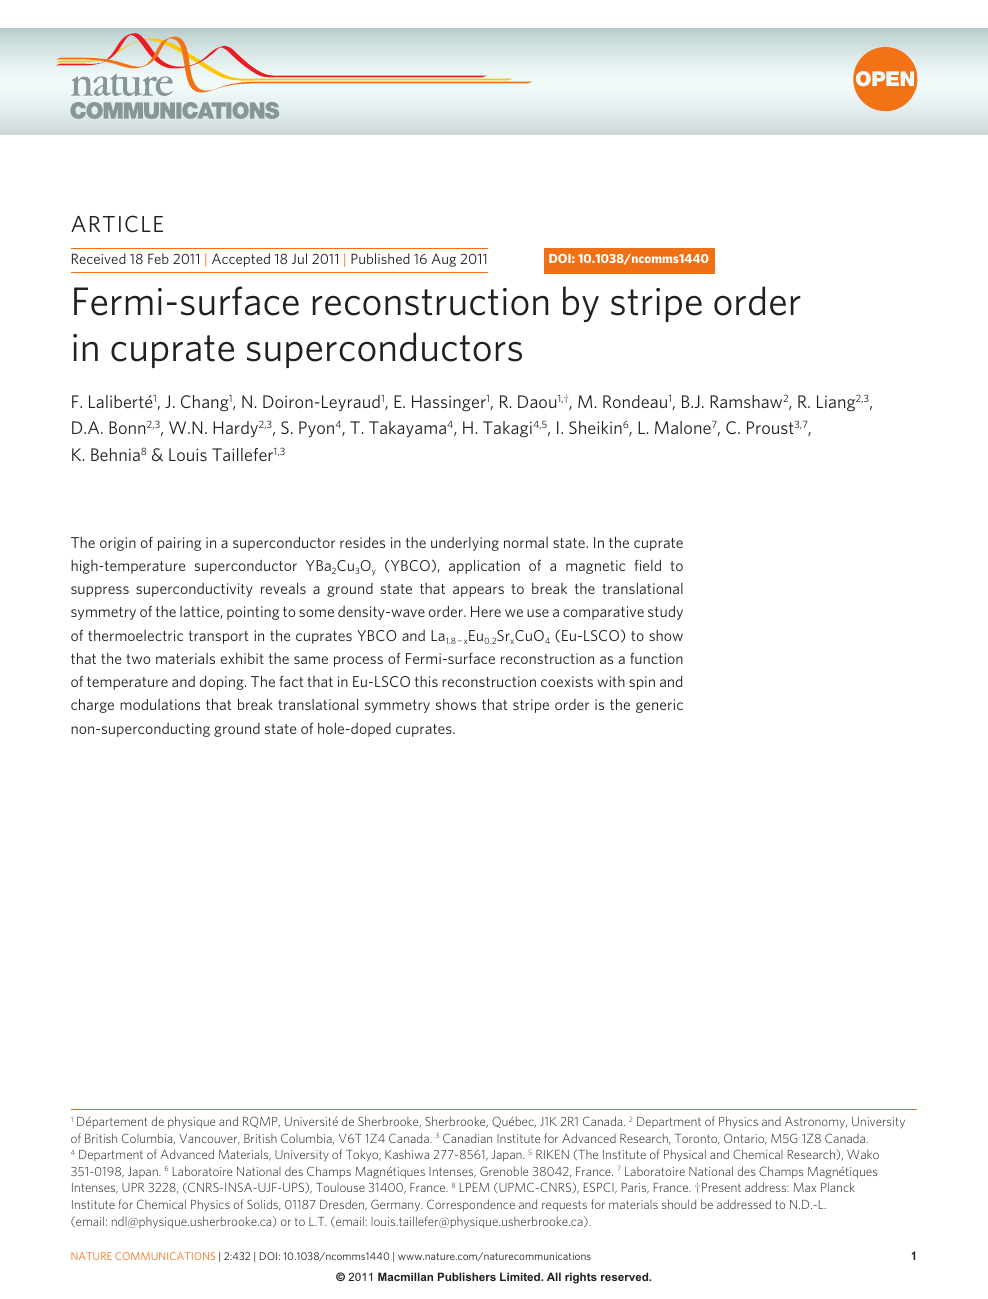 Fermi Surface Reconstruction By Stripe Order In Cuprate Superconductors Topic Of Research Paper In Physical Sciences Download Scholarly Article Pdf And Read For Free On Cyberleninka Open Science Hub